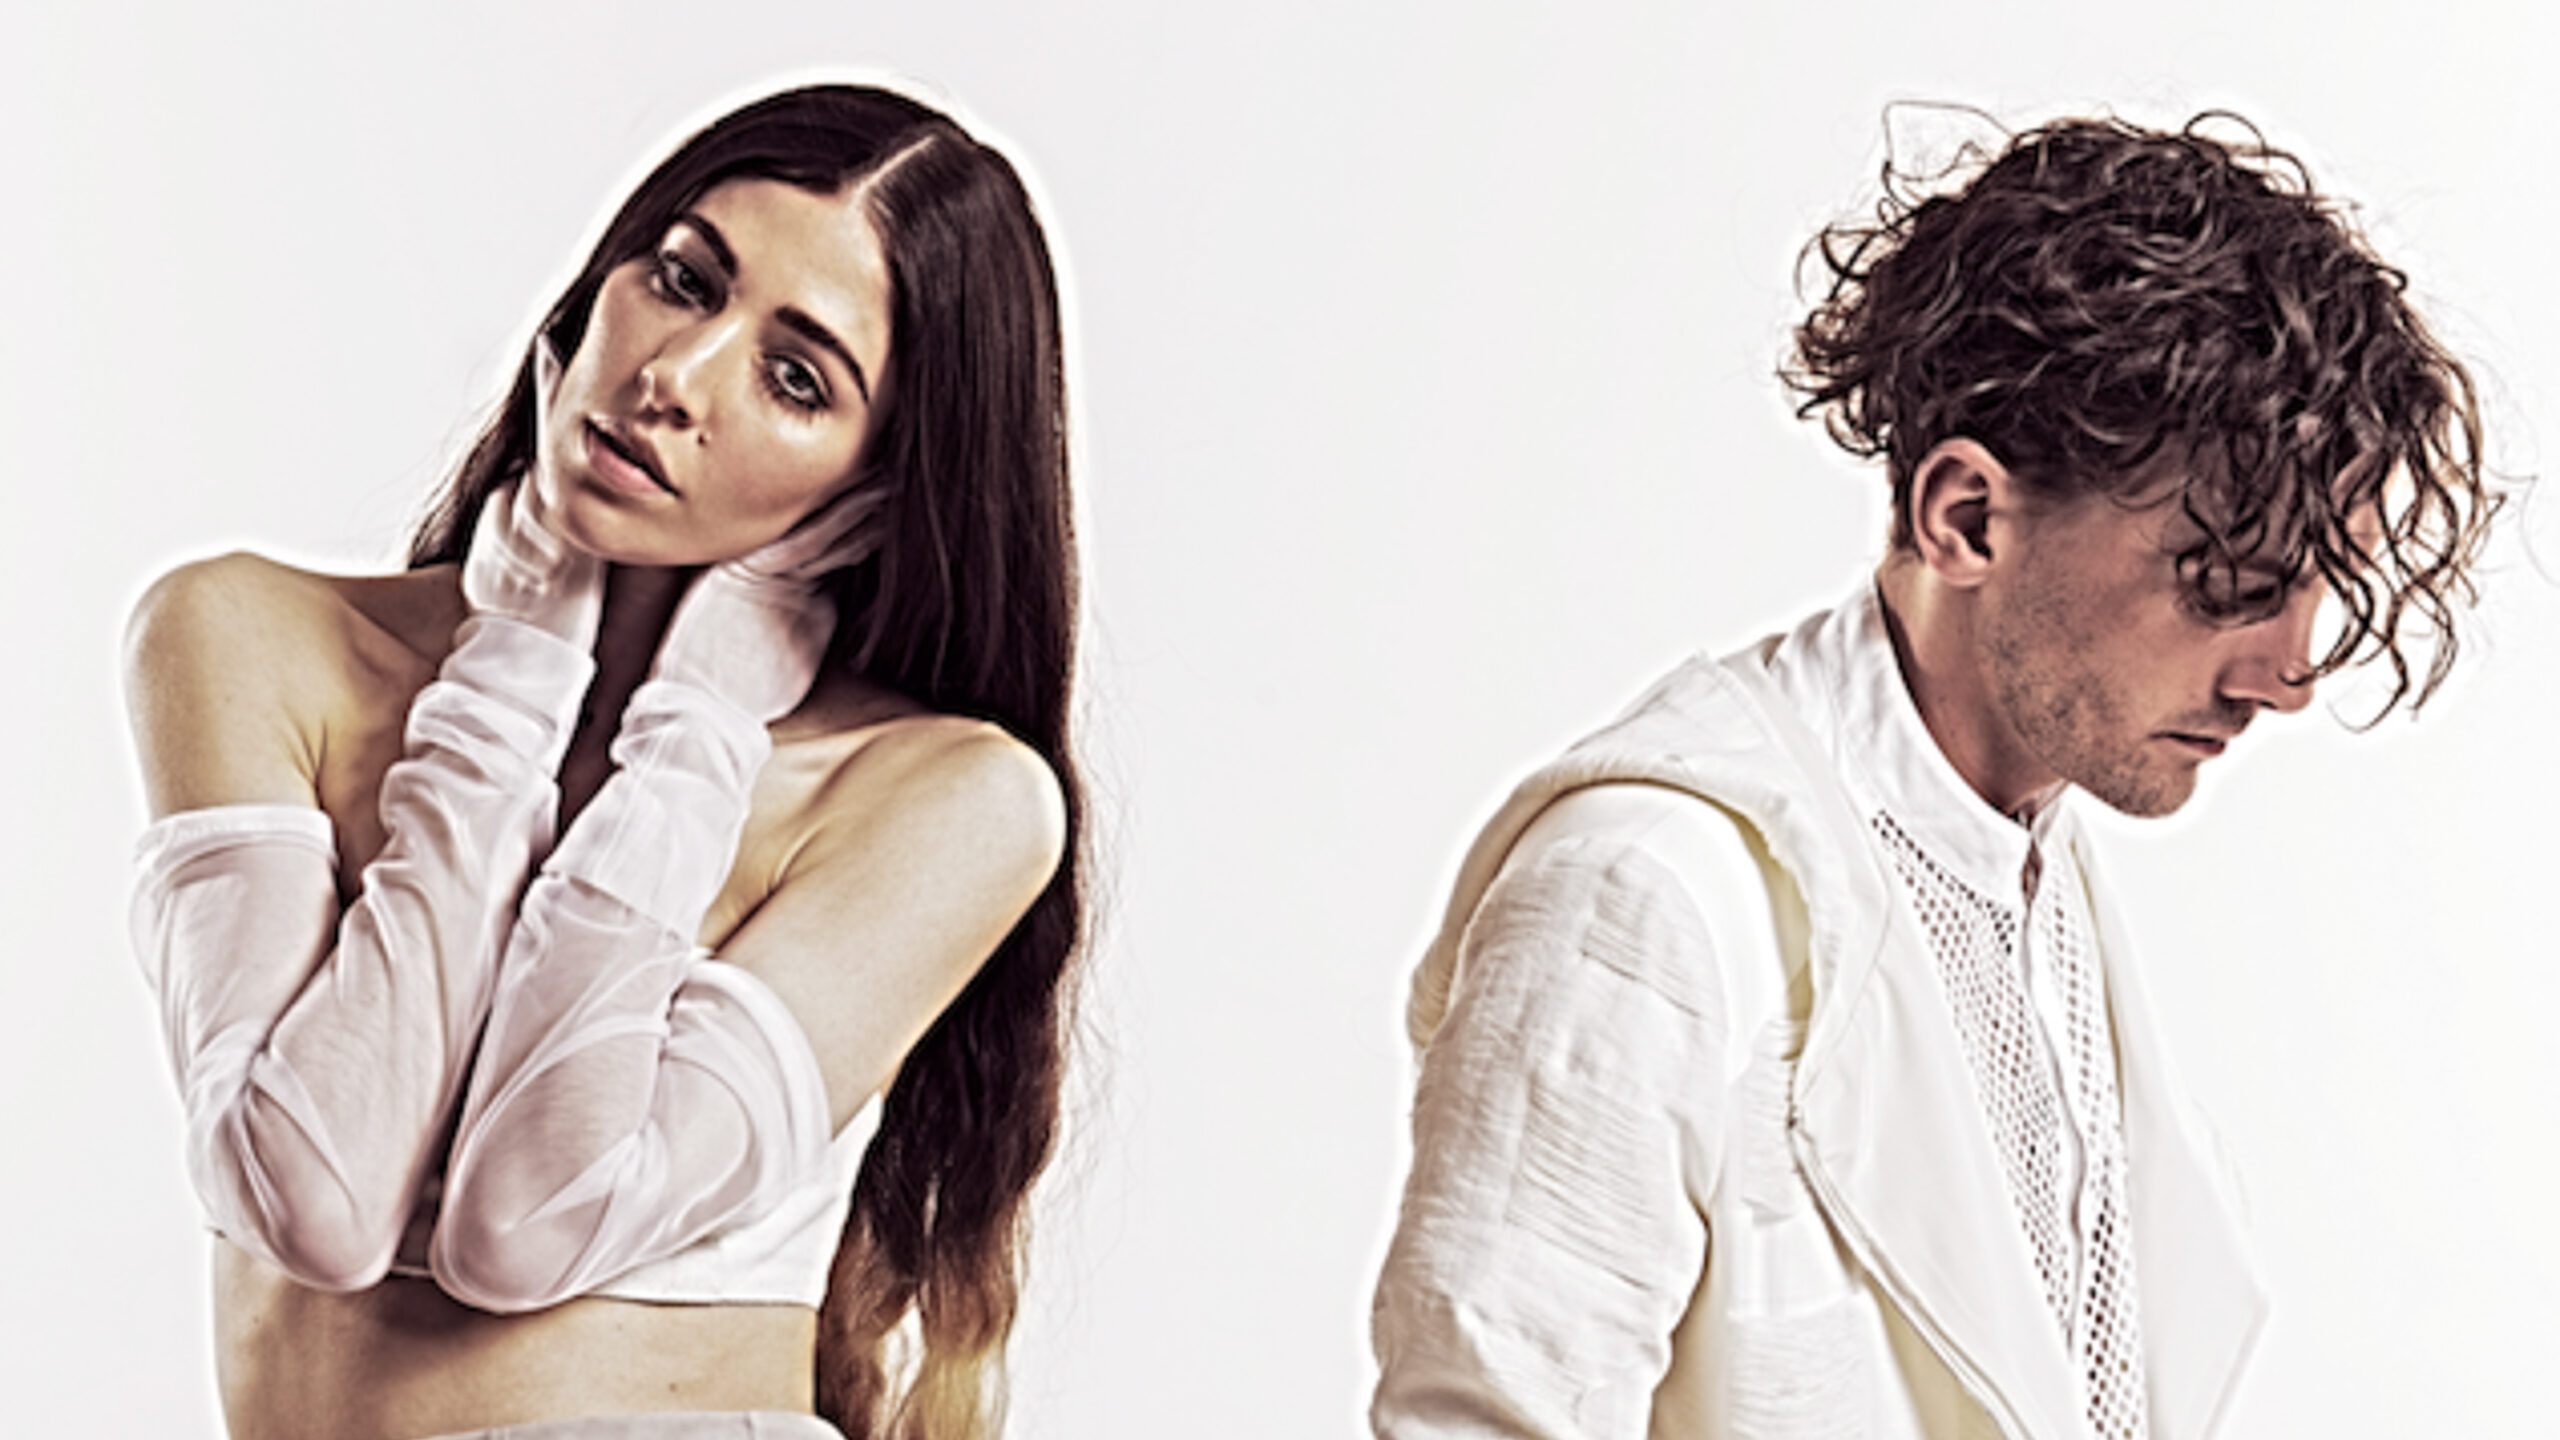 Synthpop duo Chairlift to ignite Manila with their signature style